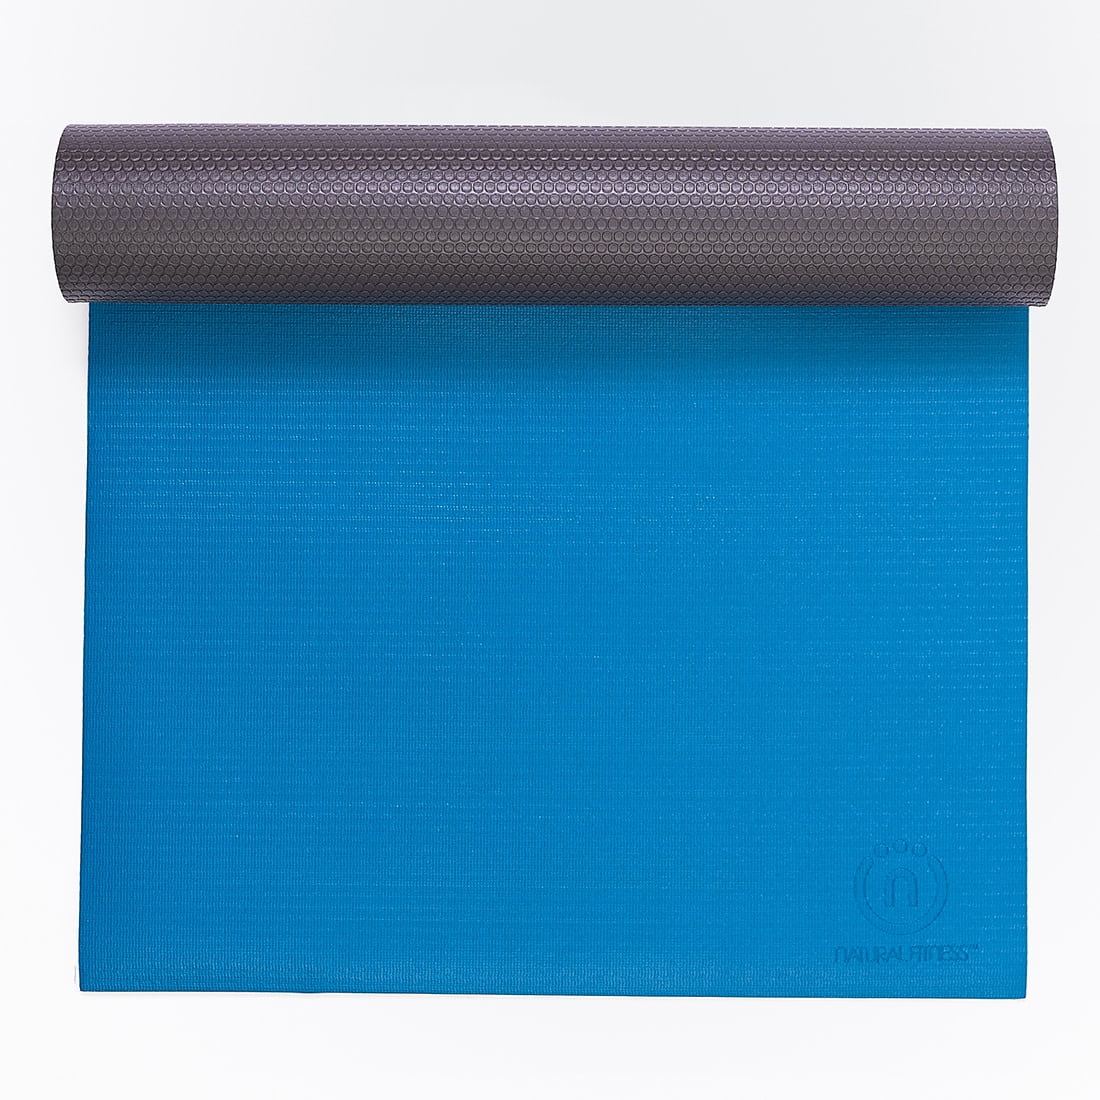 Natural Fitness 5mm Thick Warrior Yoga Mat Designed for